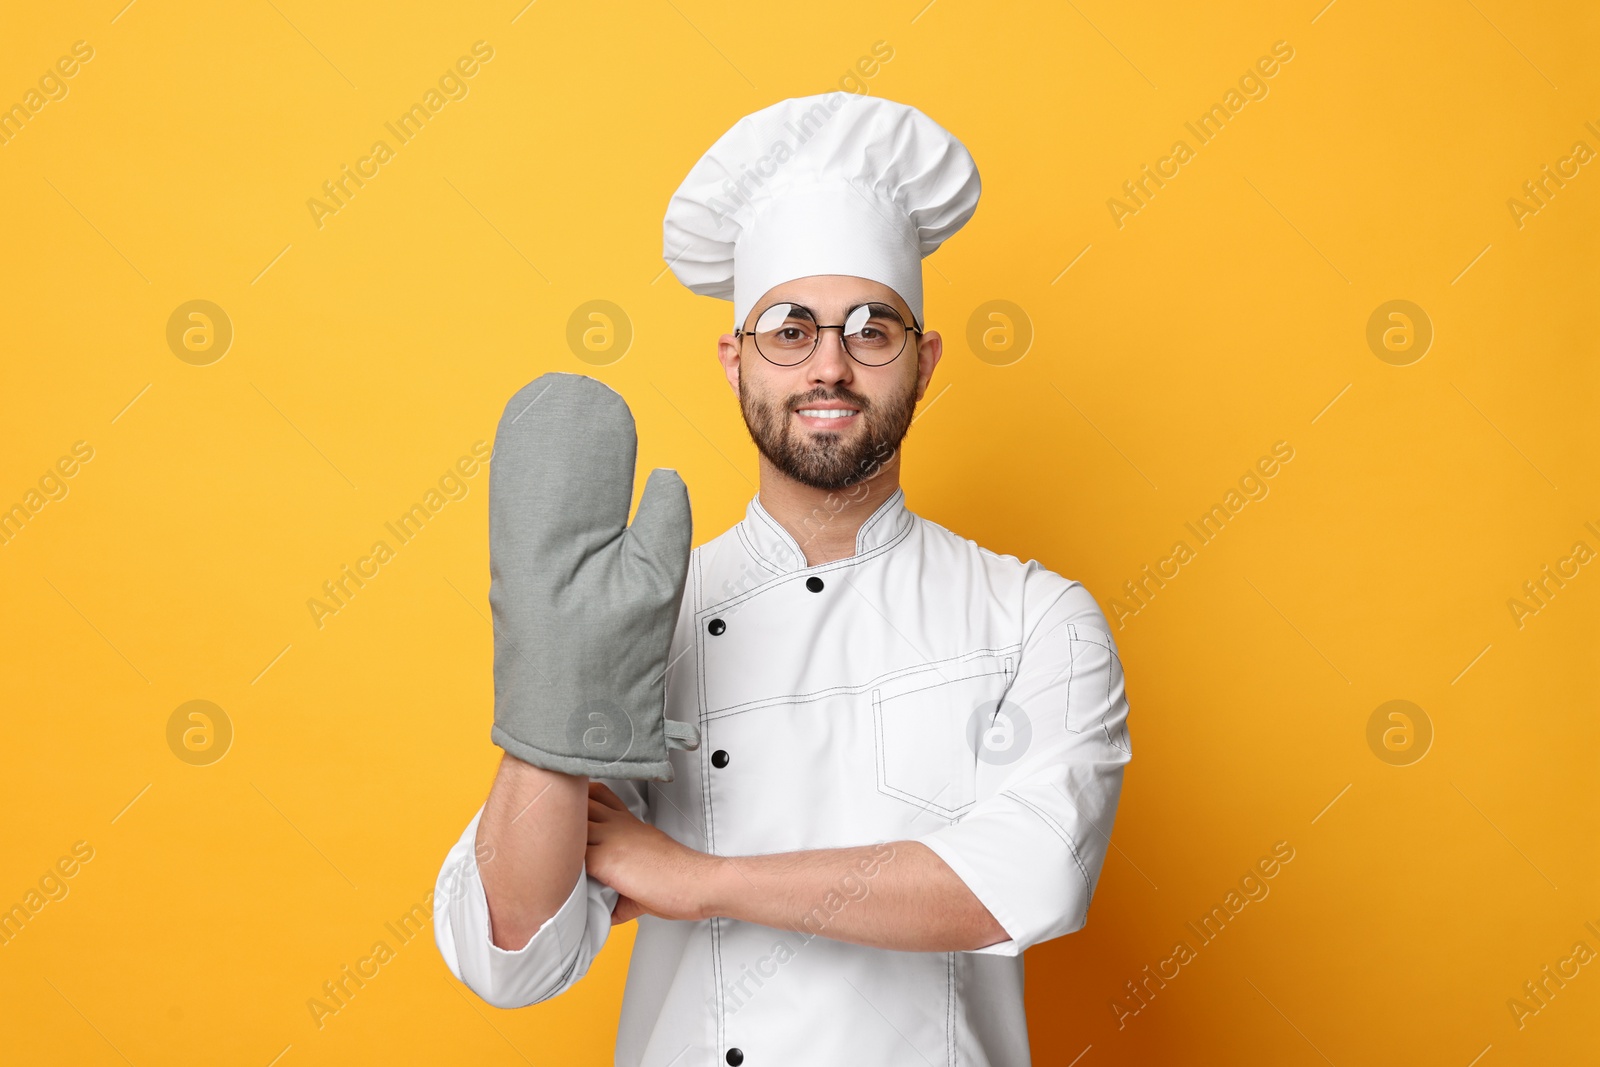 Photo of Professional chef in uniform on yellow background